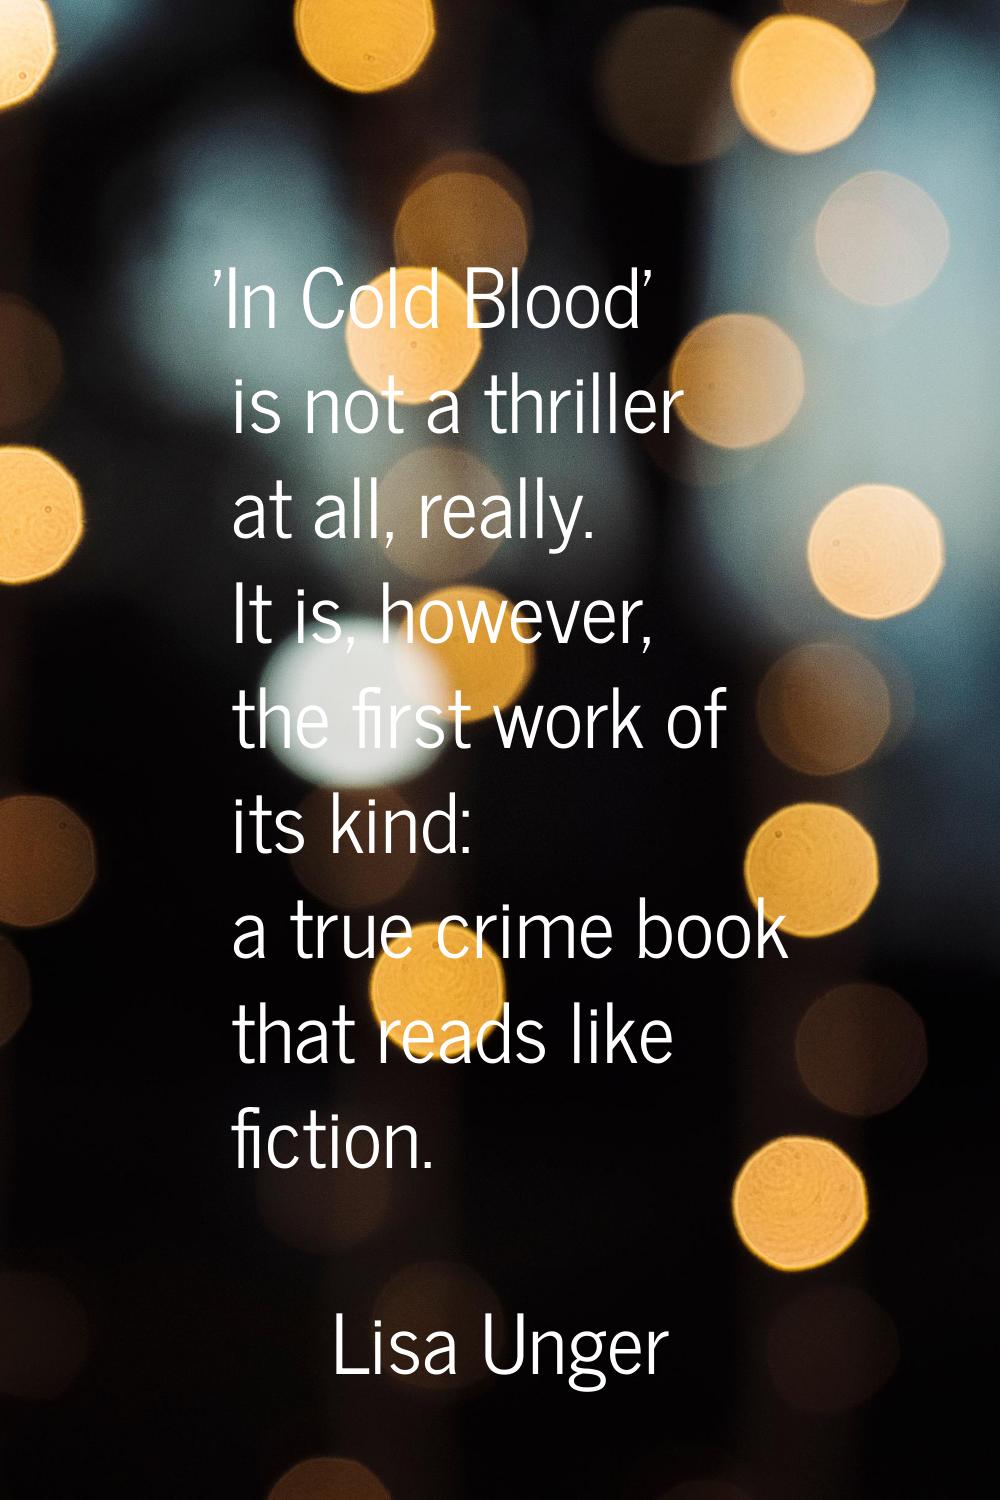 'In Cold Blood' is not a thriller at all, really. It is, however, the first work of its kind: a tru